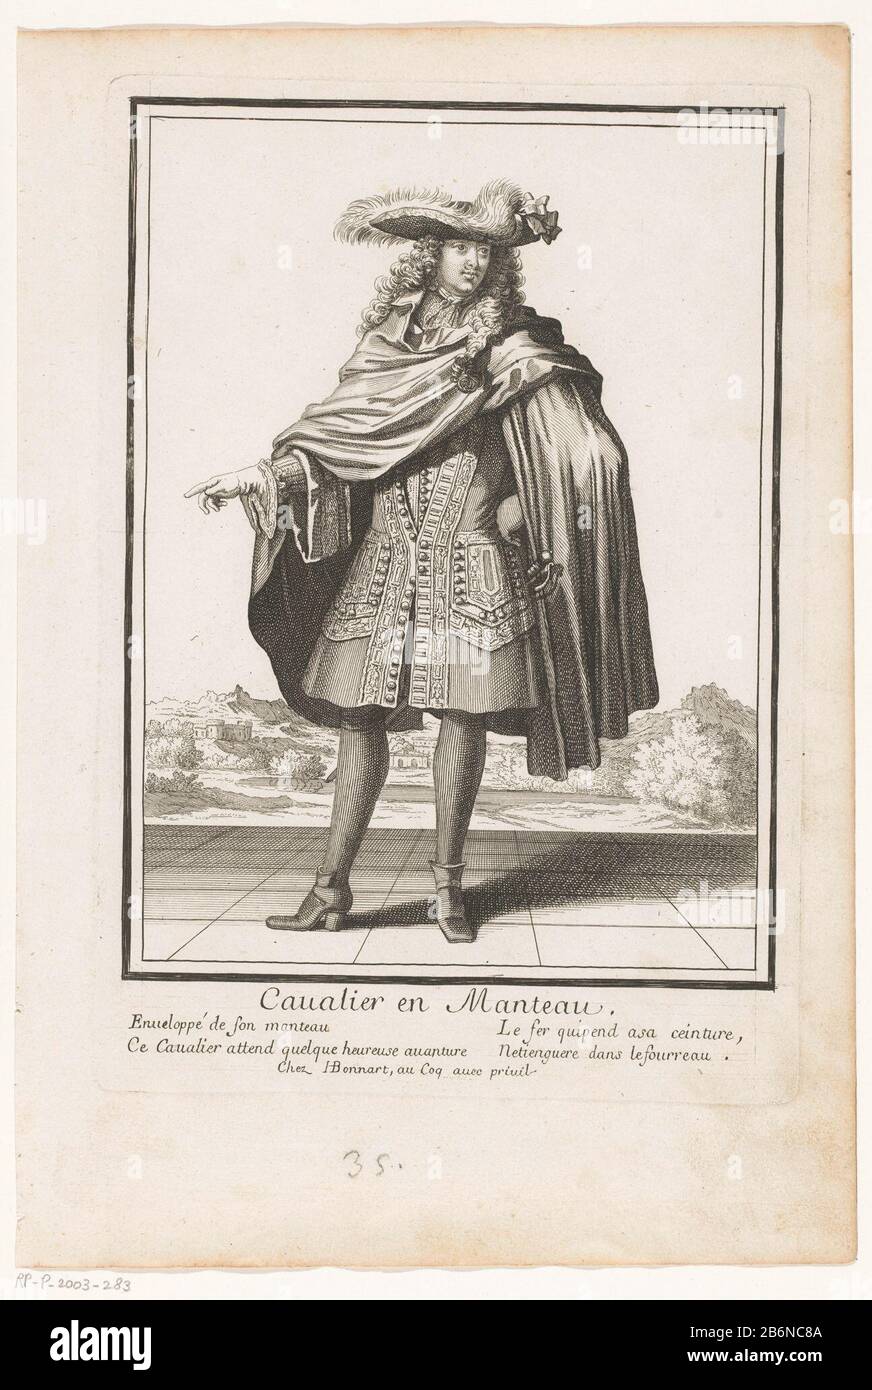 Franse edelman met schoudermantel Cavalier en manteau (titel op object)  French noble, seen from the front wearing a loose shoulder mantle over his  justaucorps. On his allongekapsel a hat with a wide